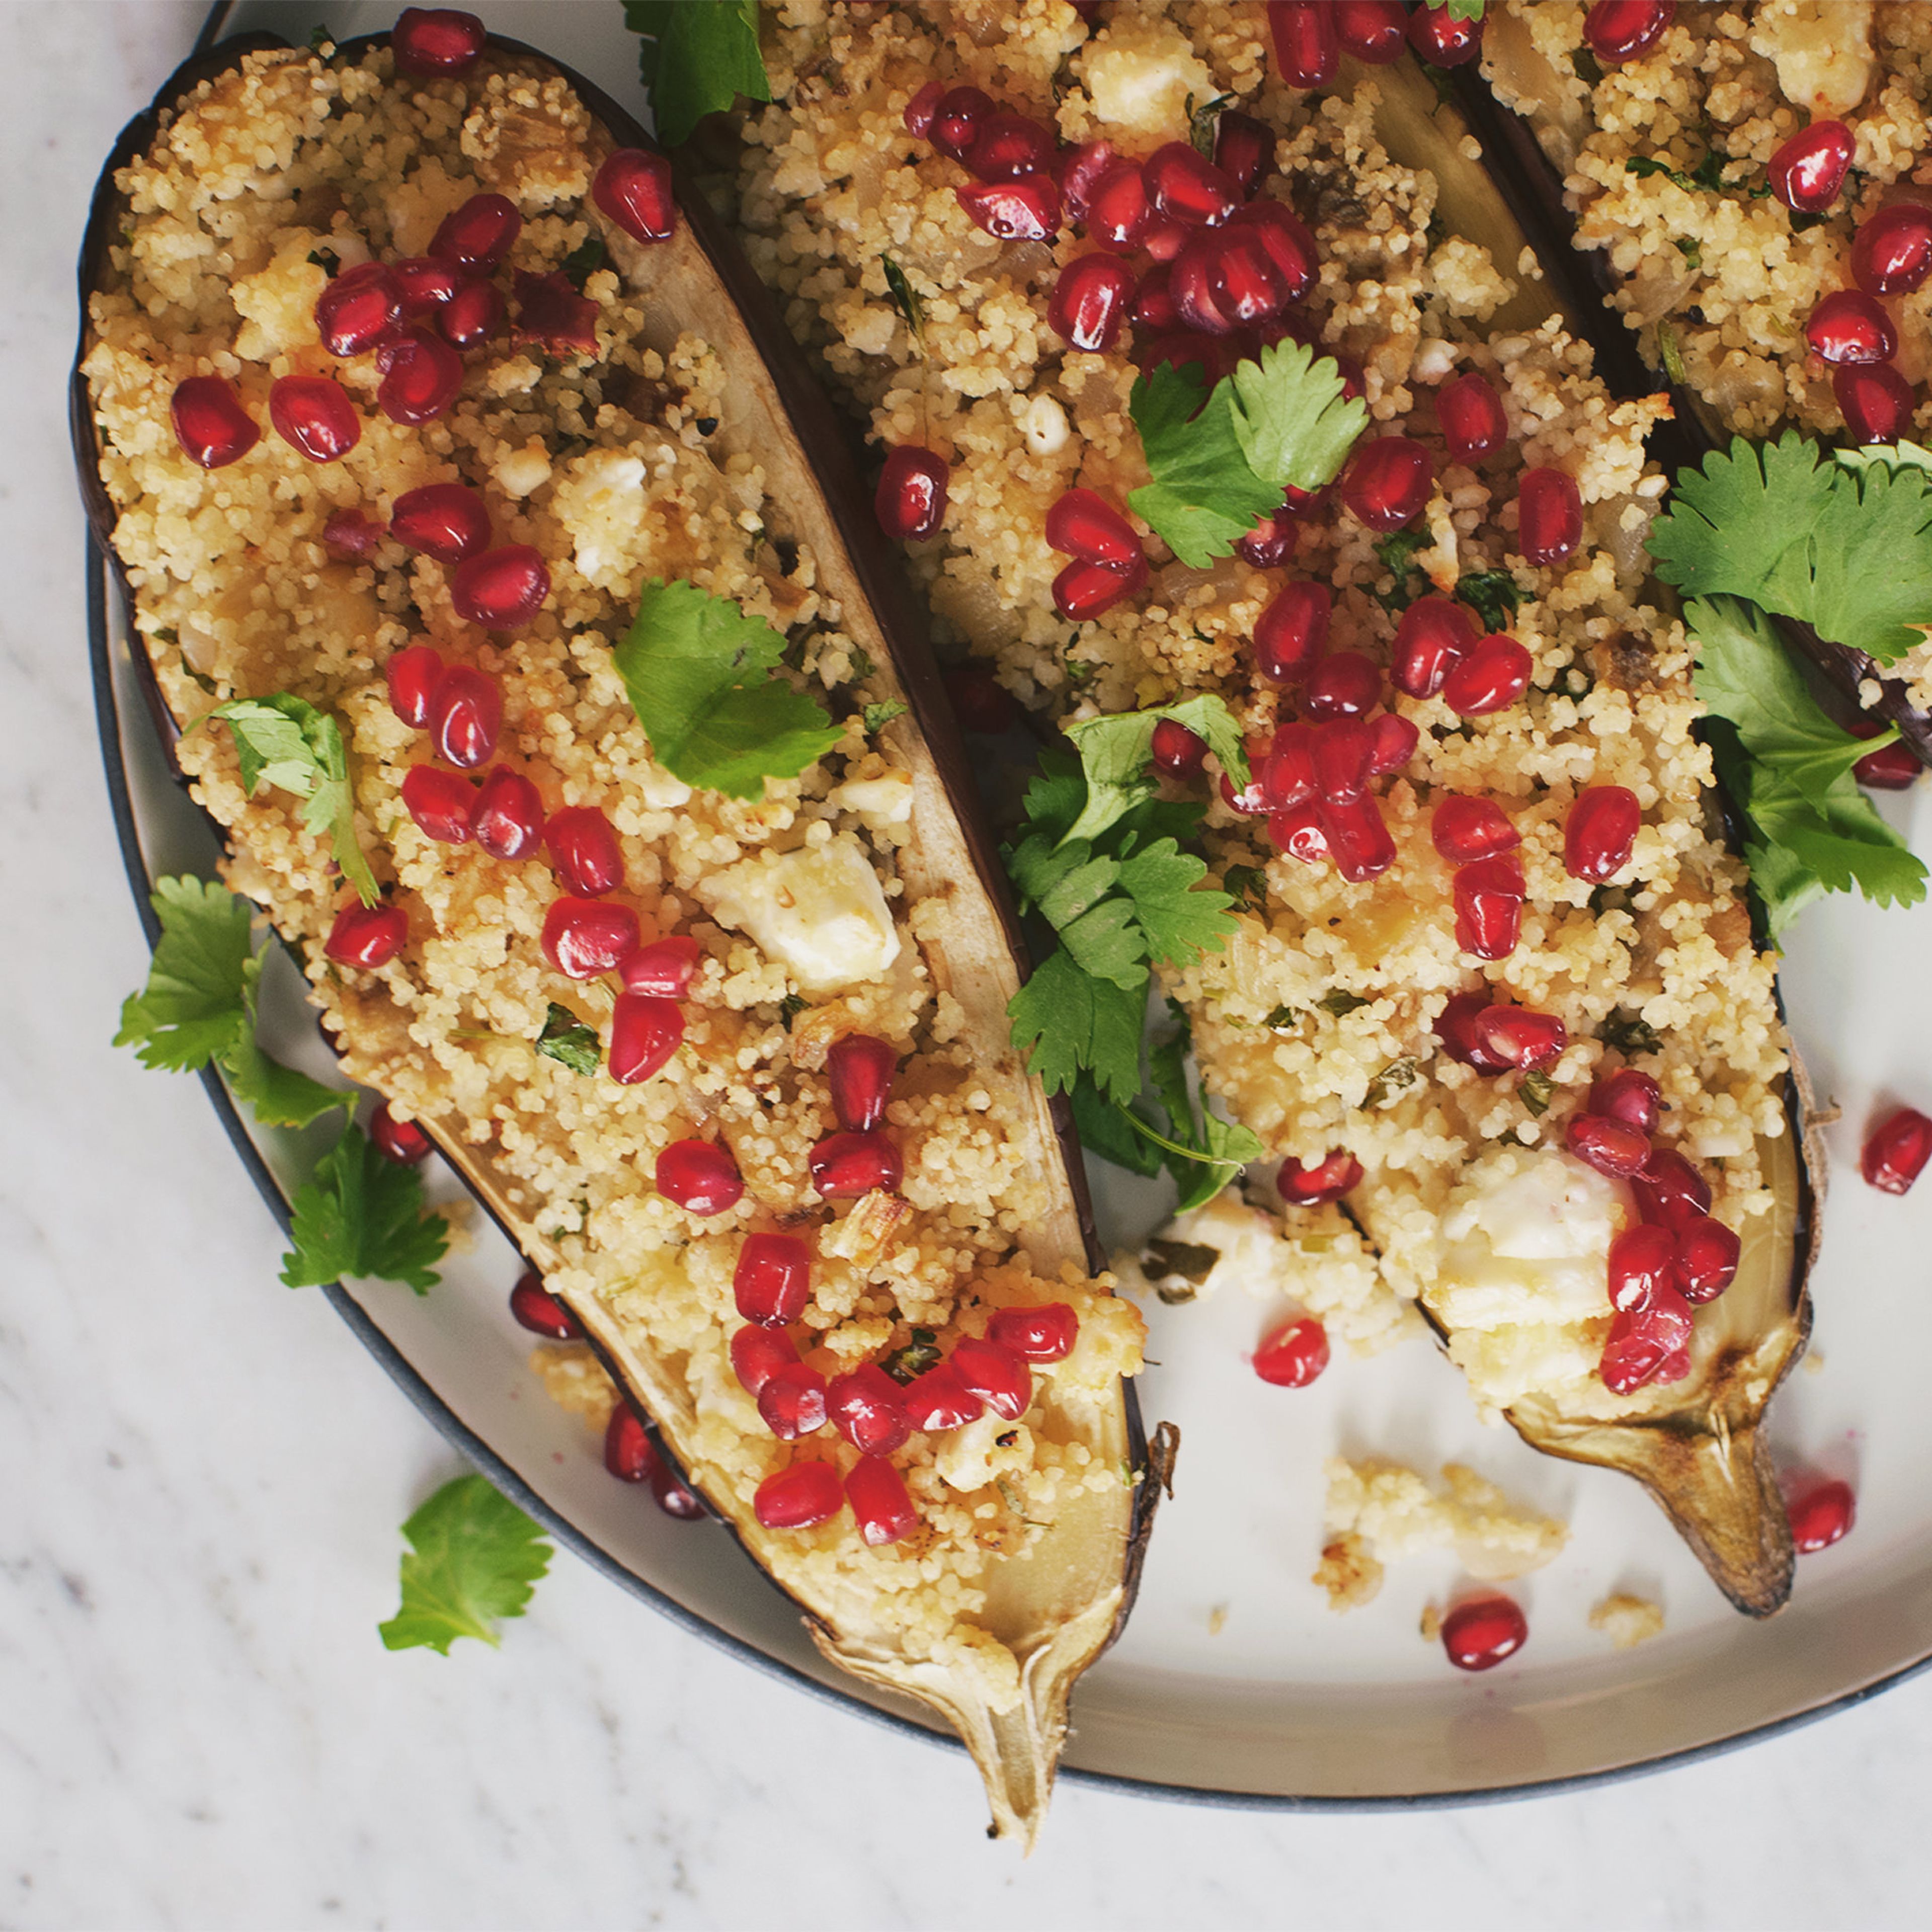 Pomegranate and couscous stuffed eggplant